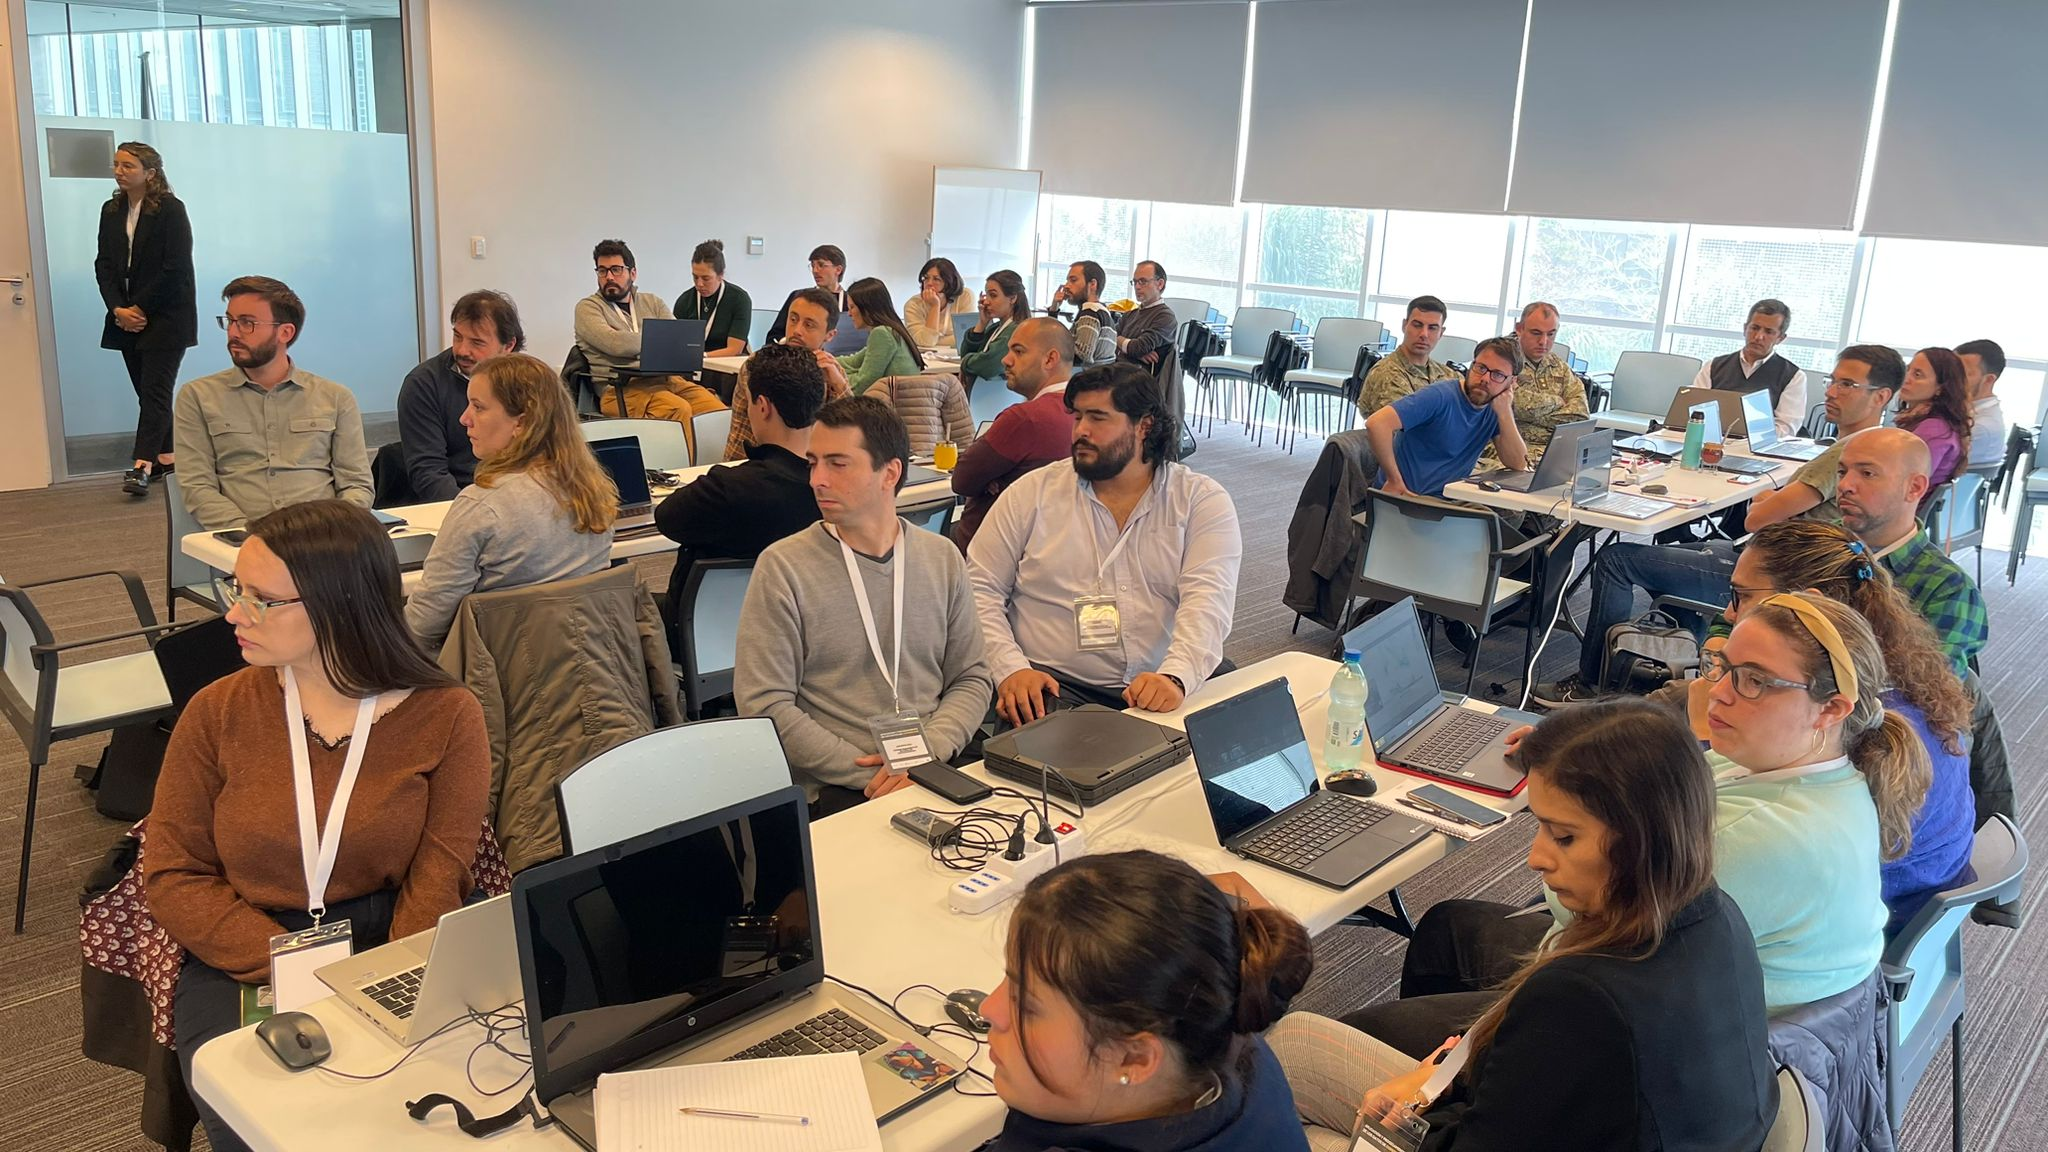 Workshop trained uruguayan professionals in the use of Copernicus data